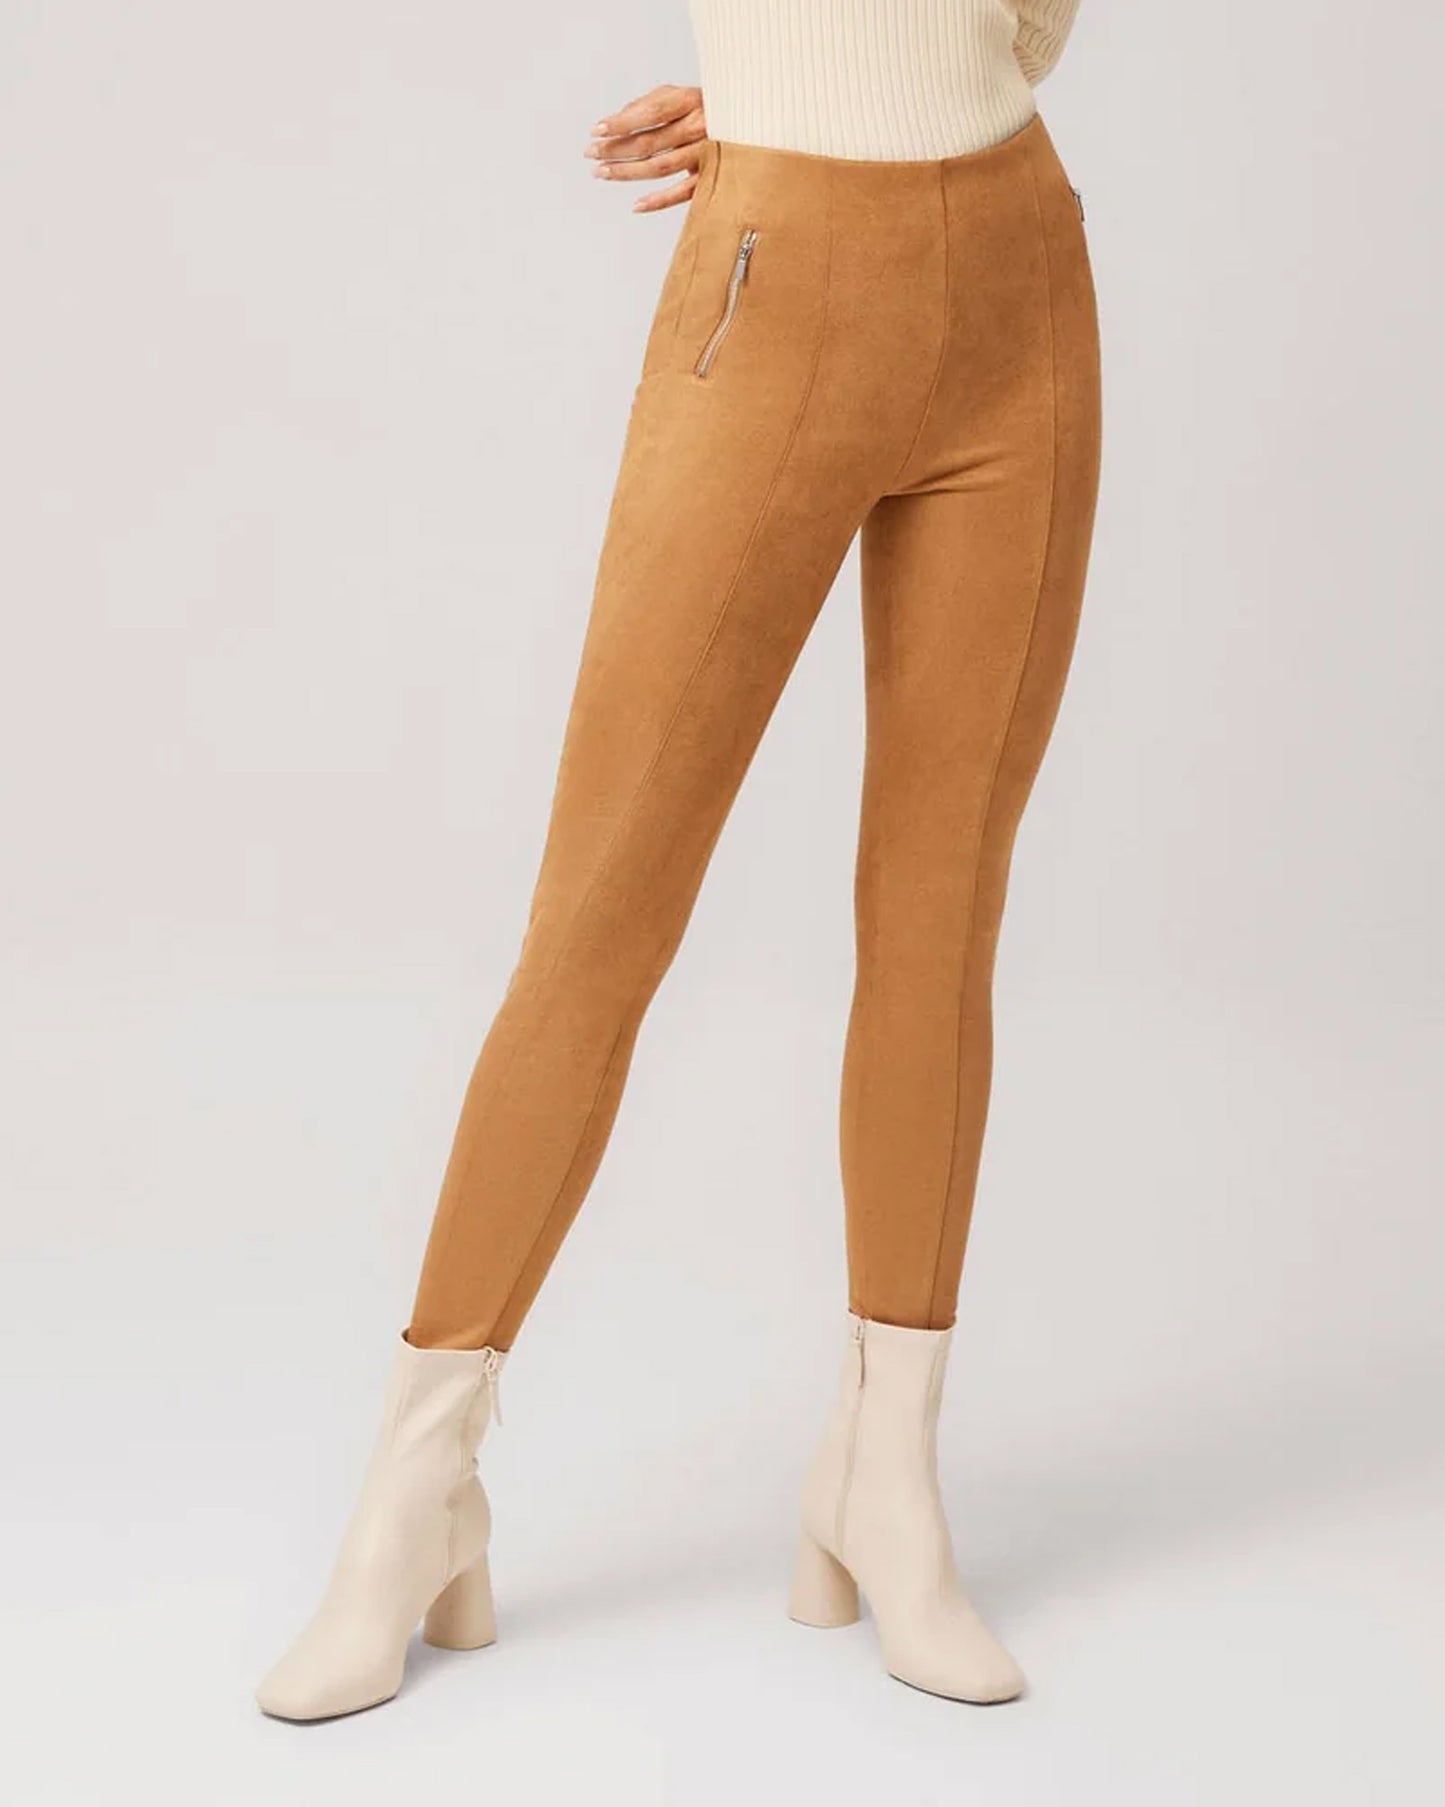 Ysabel Mora 70297 Faux Suede Leggings - Camel / tan coloured soft and plush faux suede high waisted trouser leggings (treggings) with raised seam down the front and zipper details on the sides.